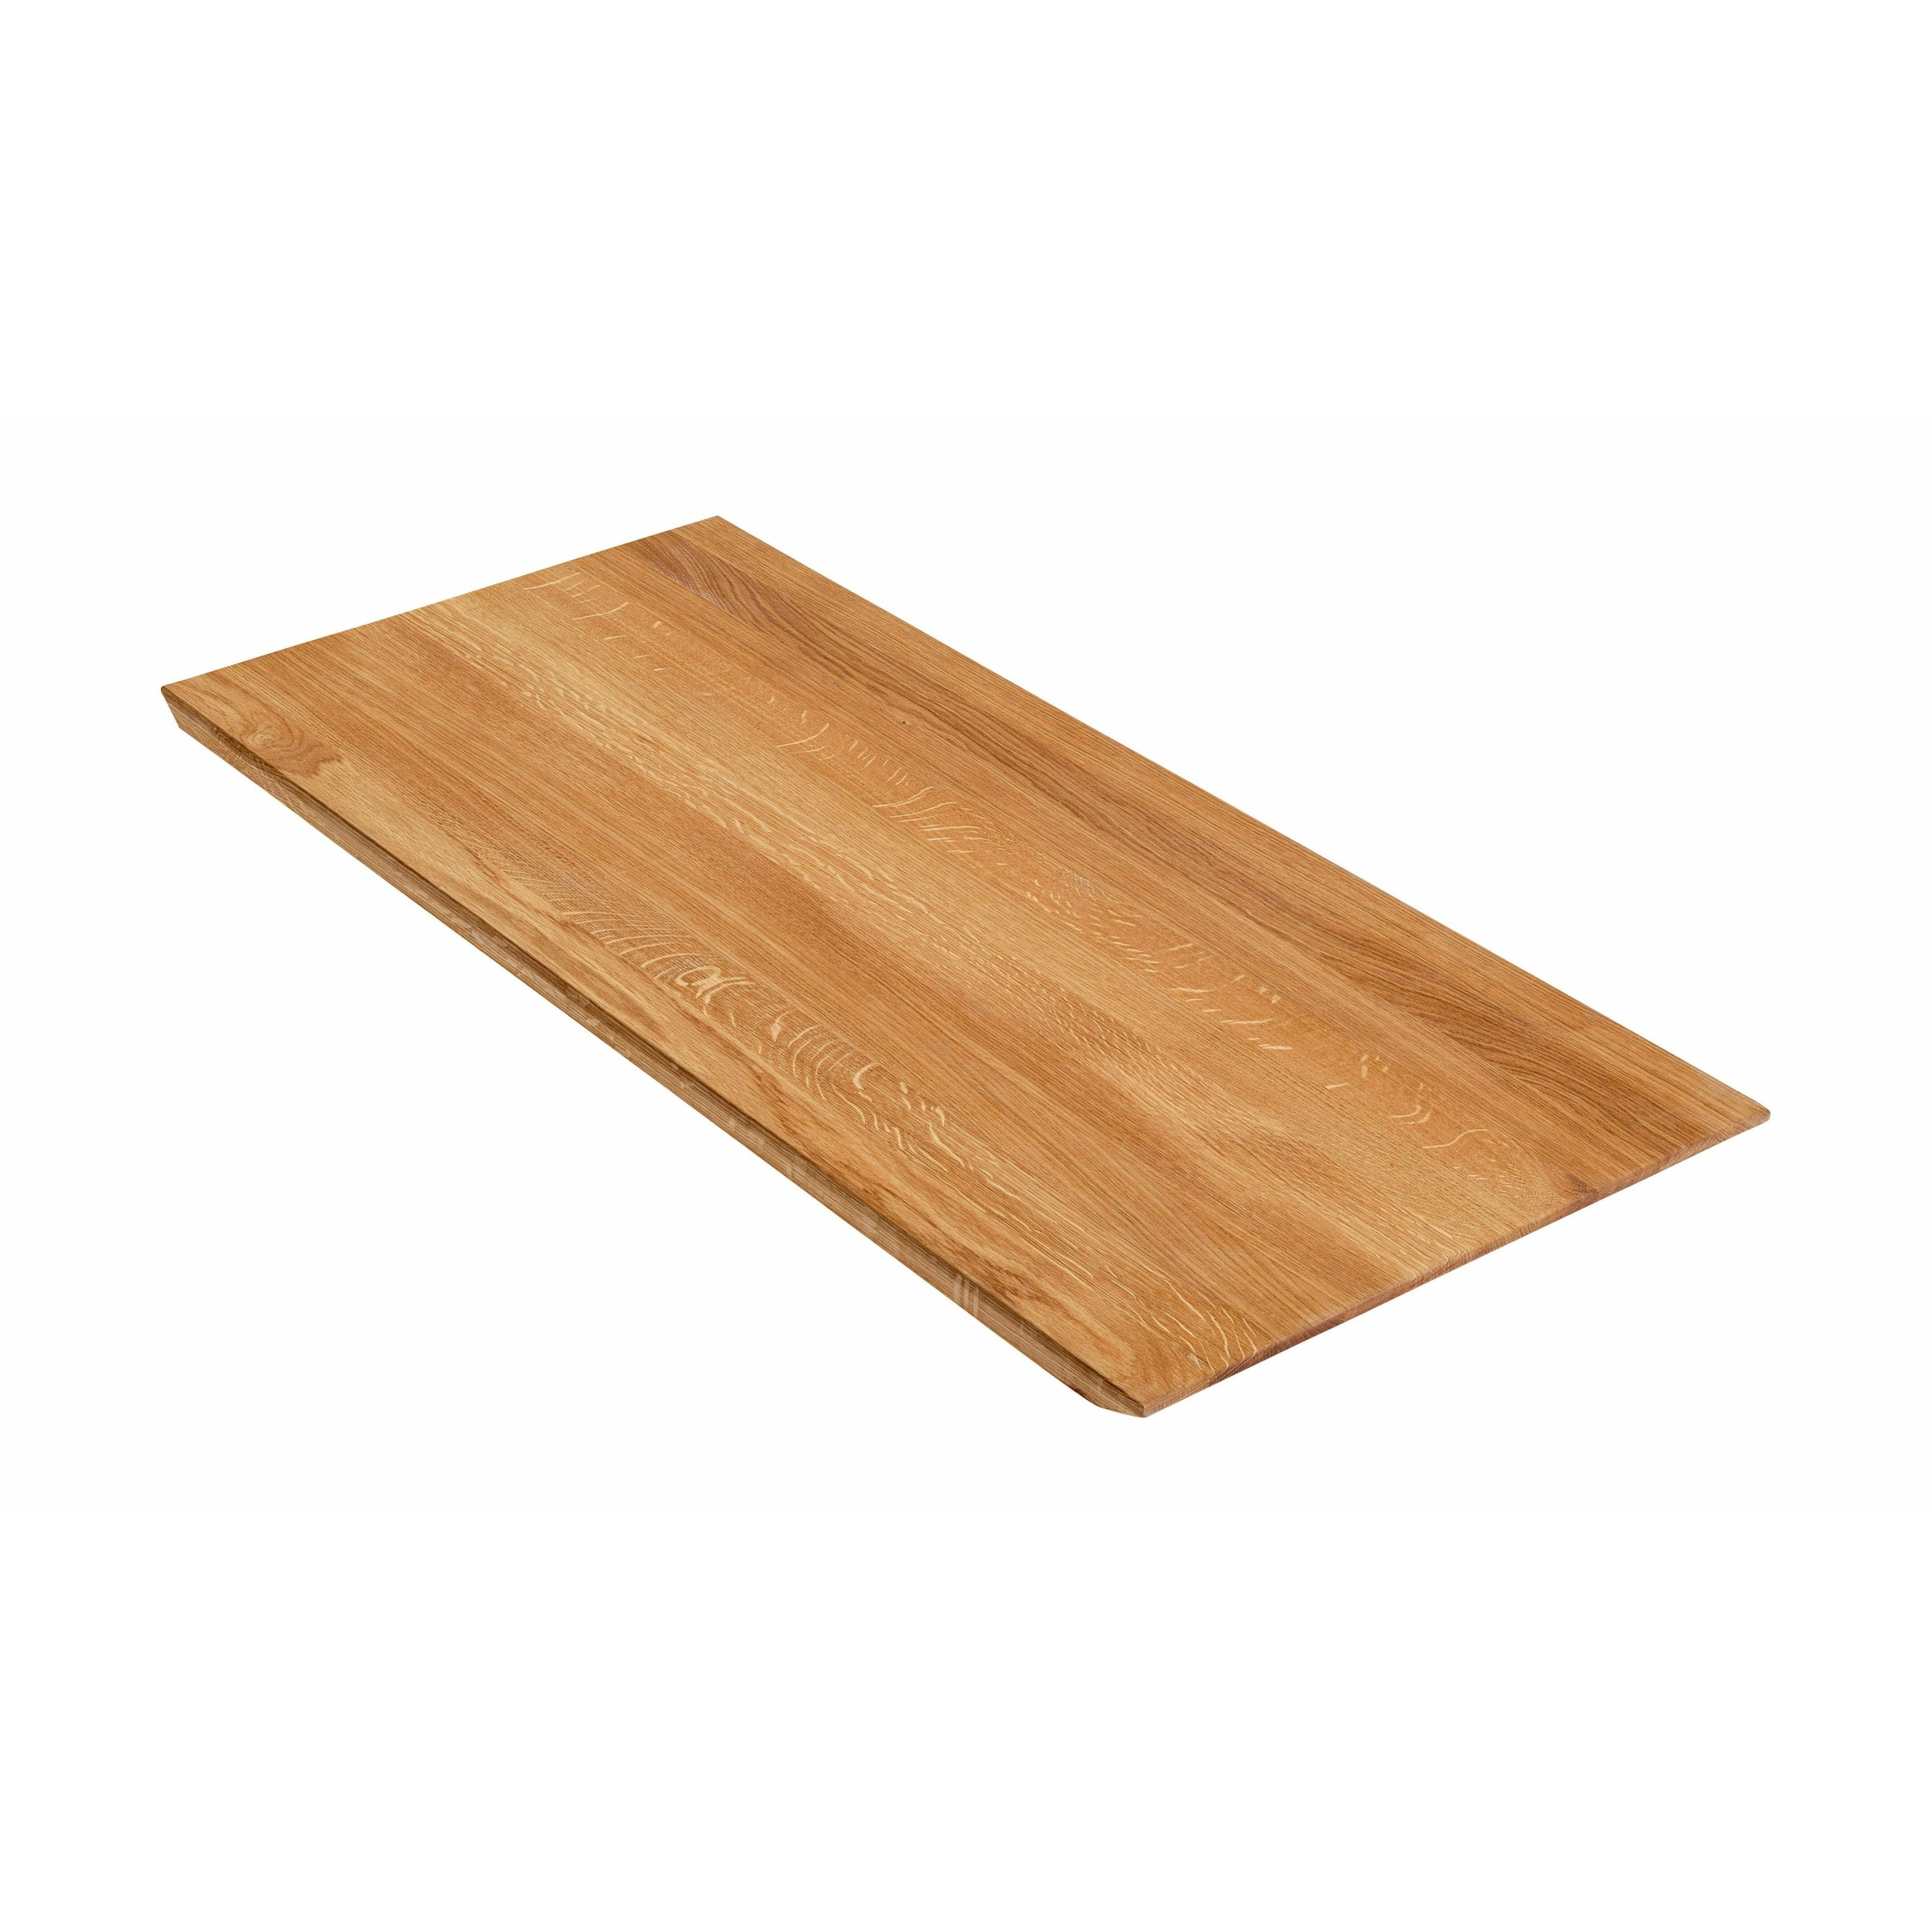 Muubs Space Expansion Plate 100 cm, naturalne